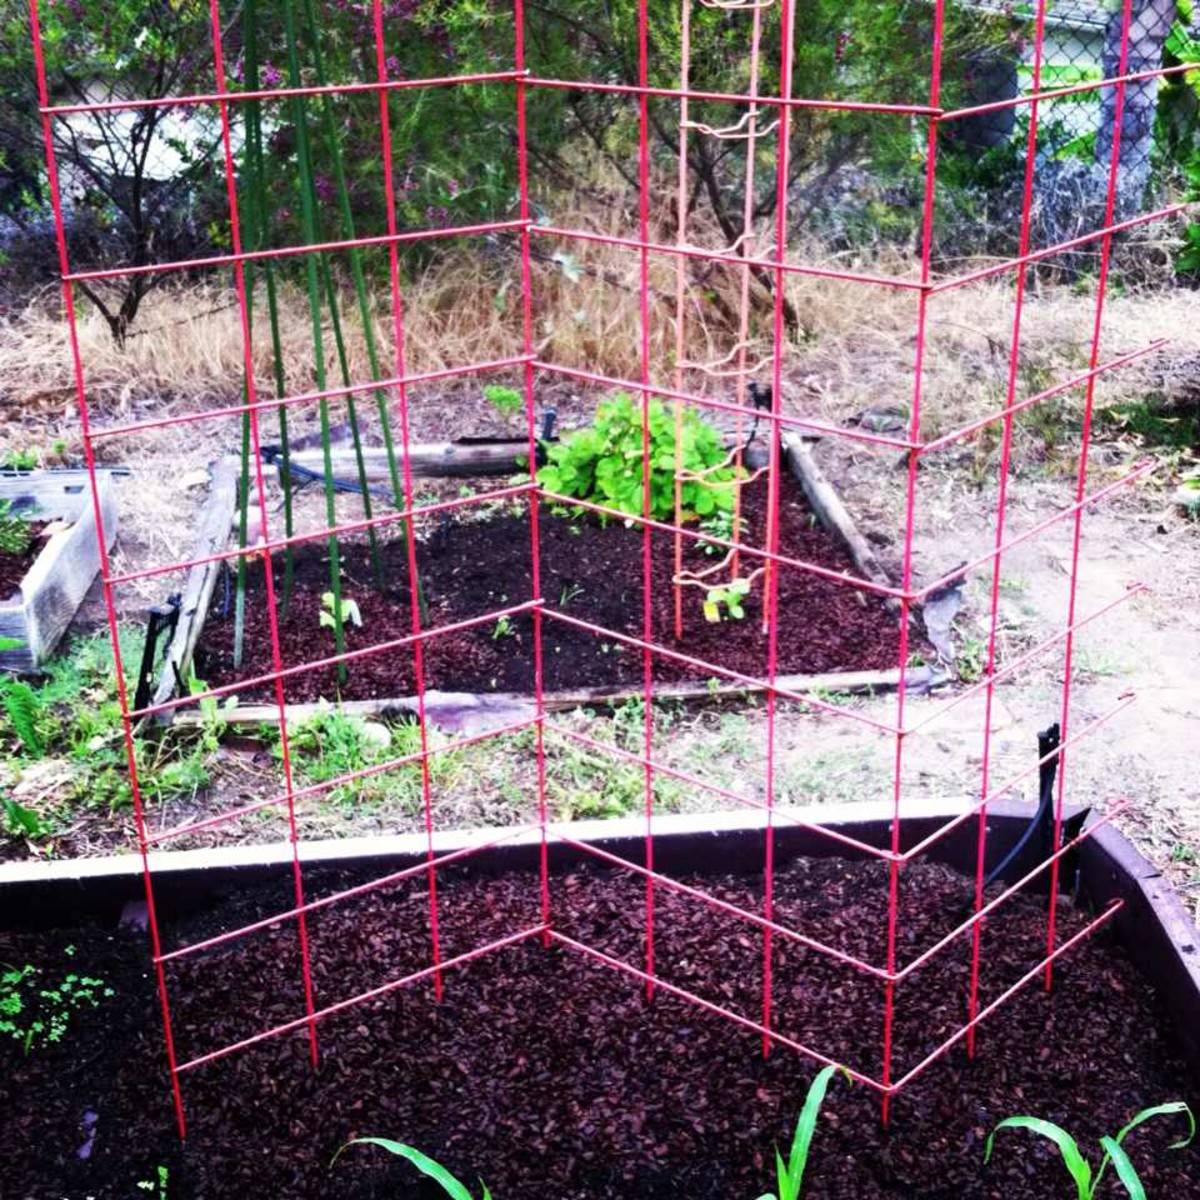 Pea Trellis: A sturdy pea fence is nice to have, particularly when space is at a premium.